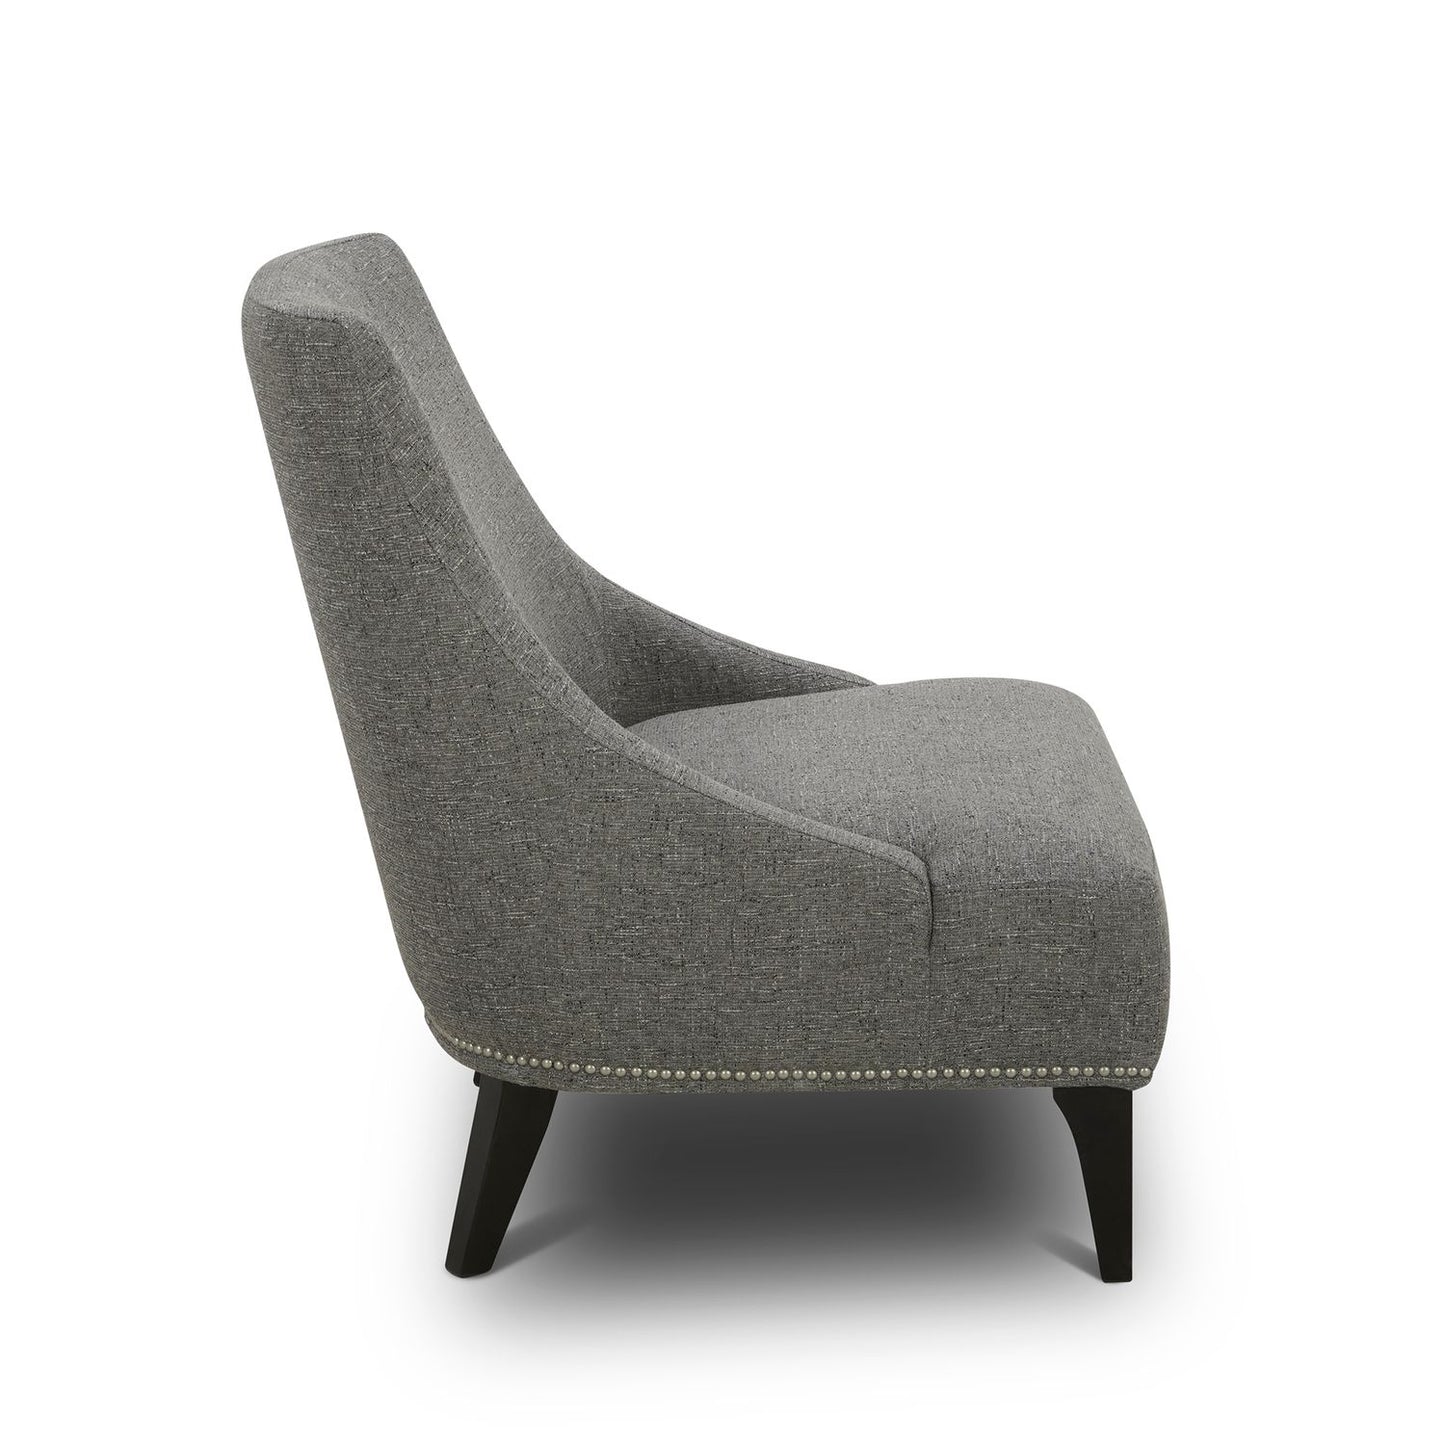 Kendall - Upholstered Accent Chair - Charcoal